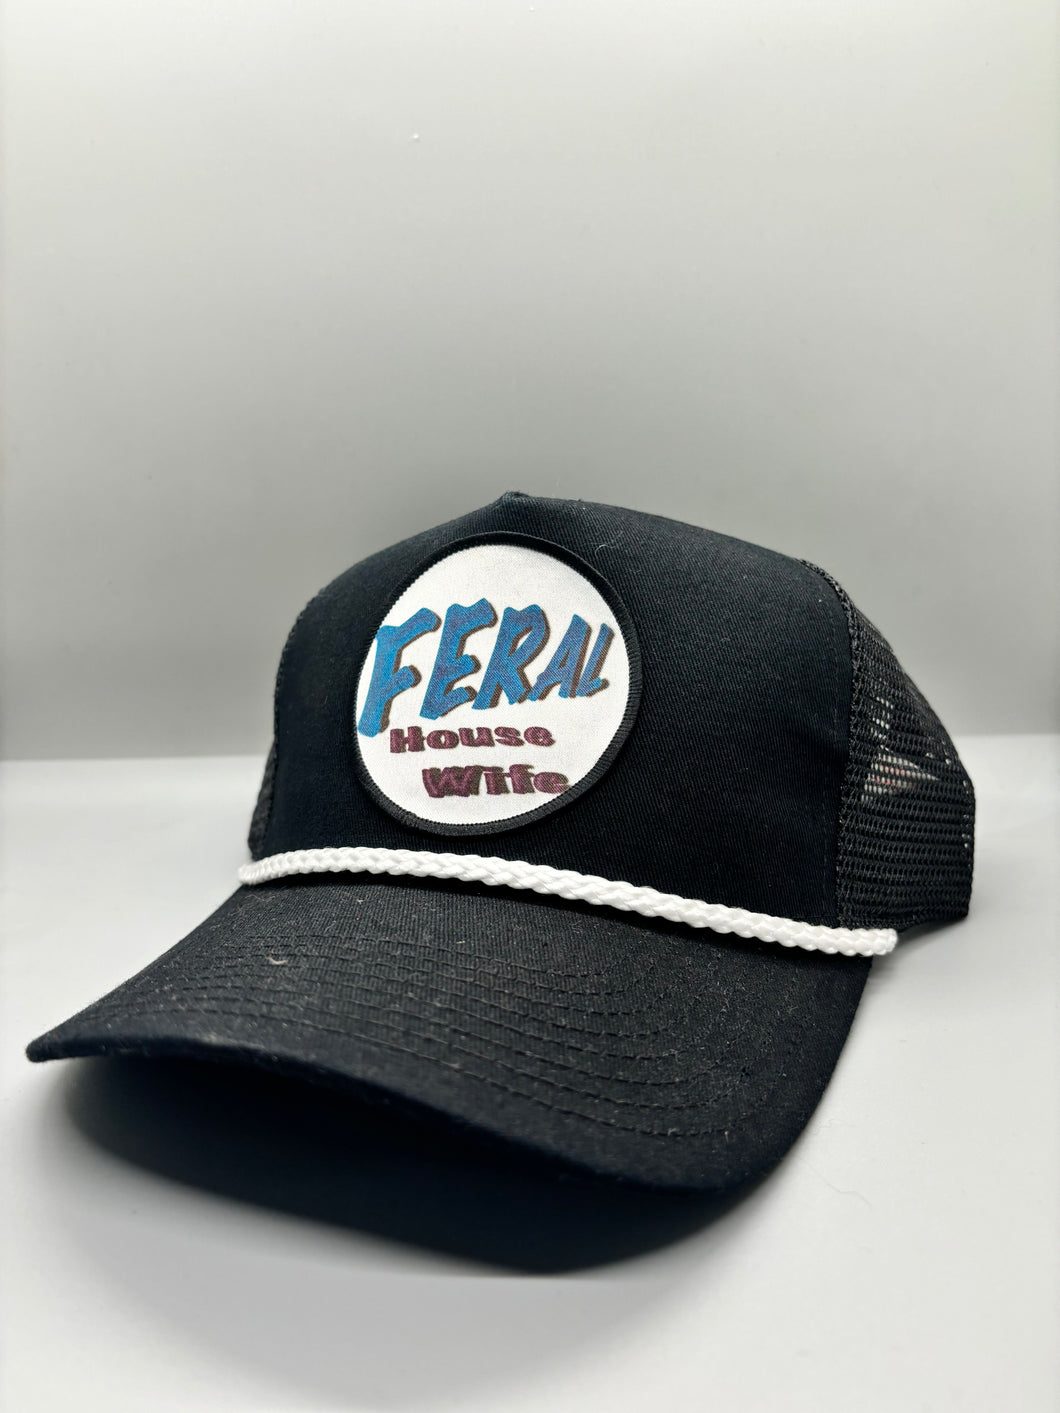 Feral House Wife hat